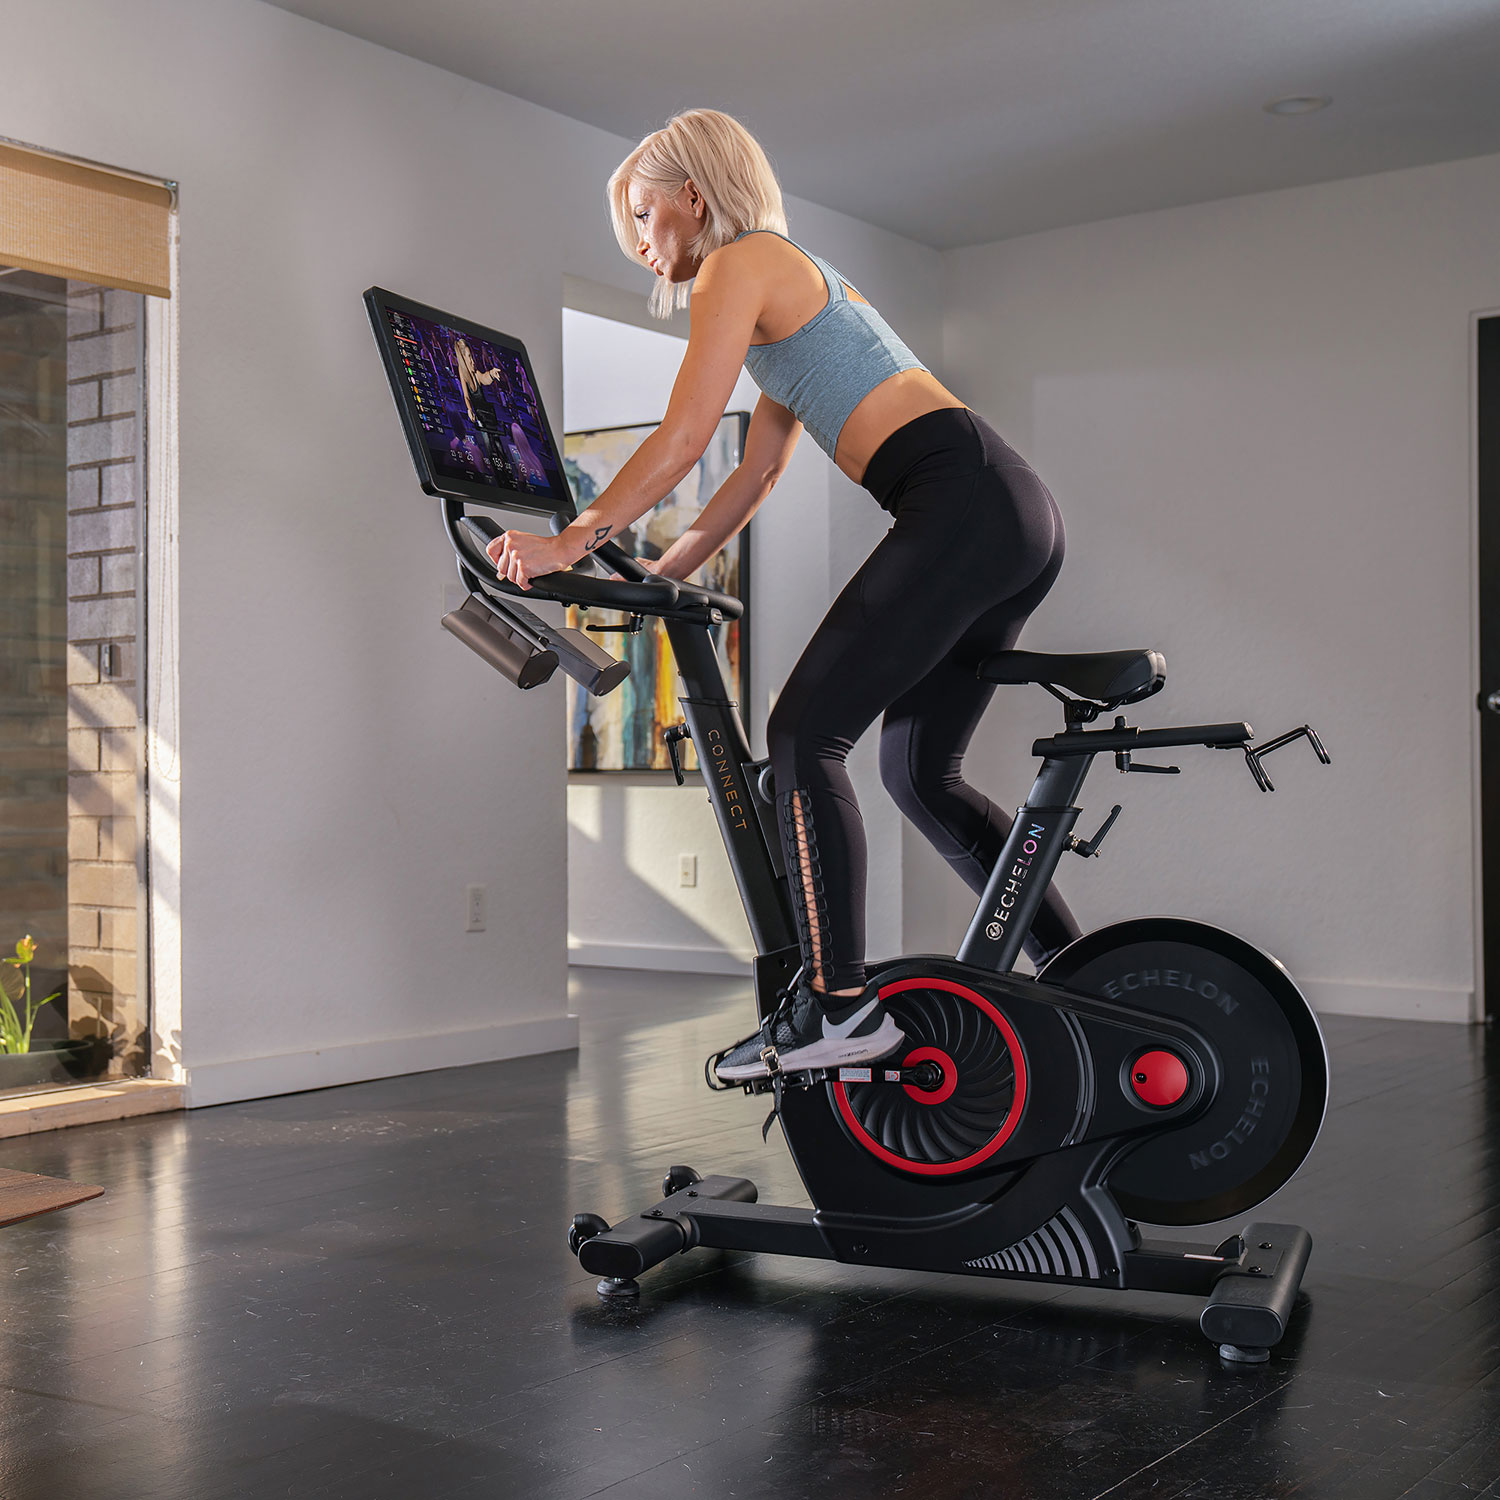 15 Minute Myx fitness bike canada for Push Pull Legs